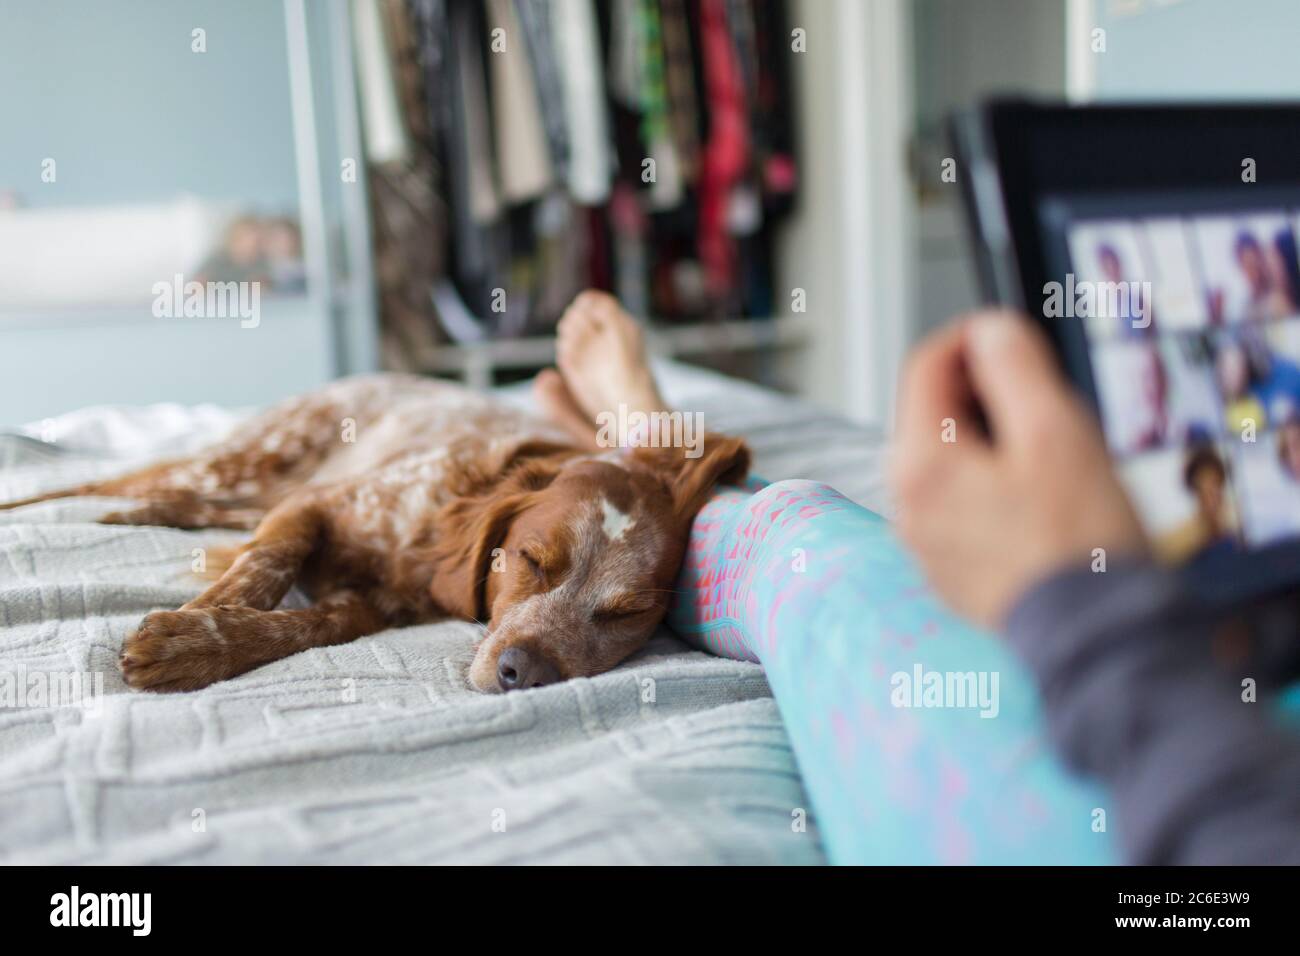 Dog sleeping on bed next to woman using digital tablet Stock Photo